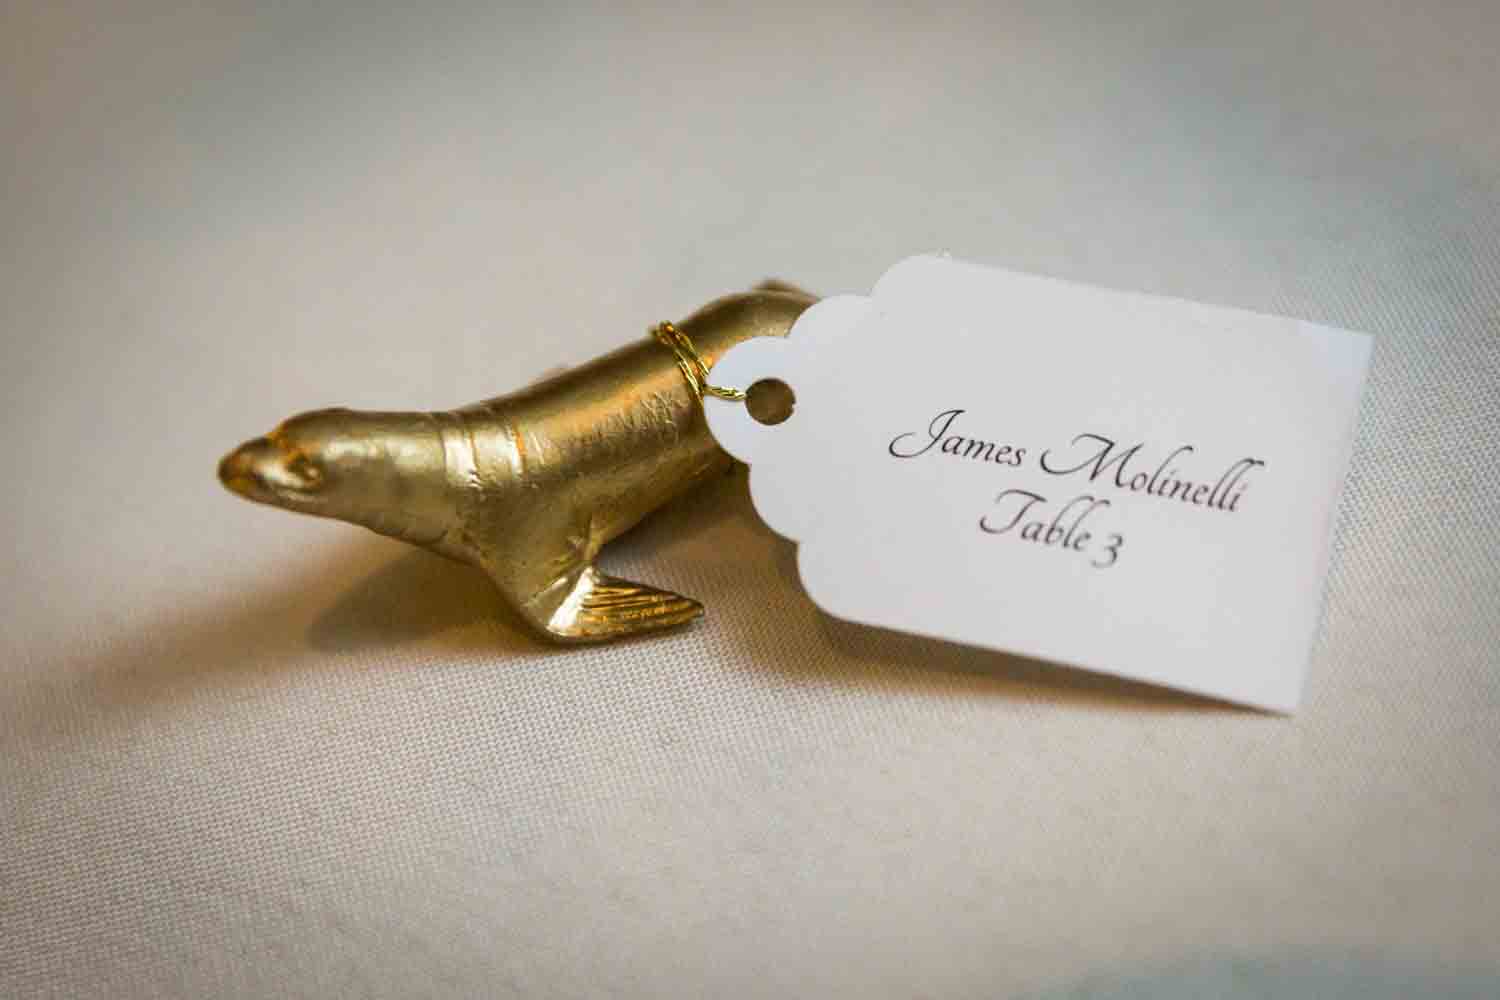 Gold seal escort card for an article on Bronx Zoo wedding venue updates